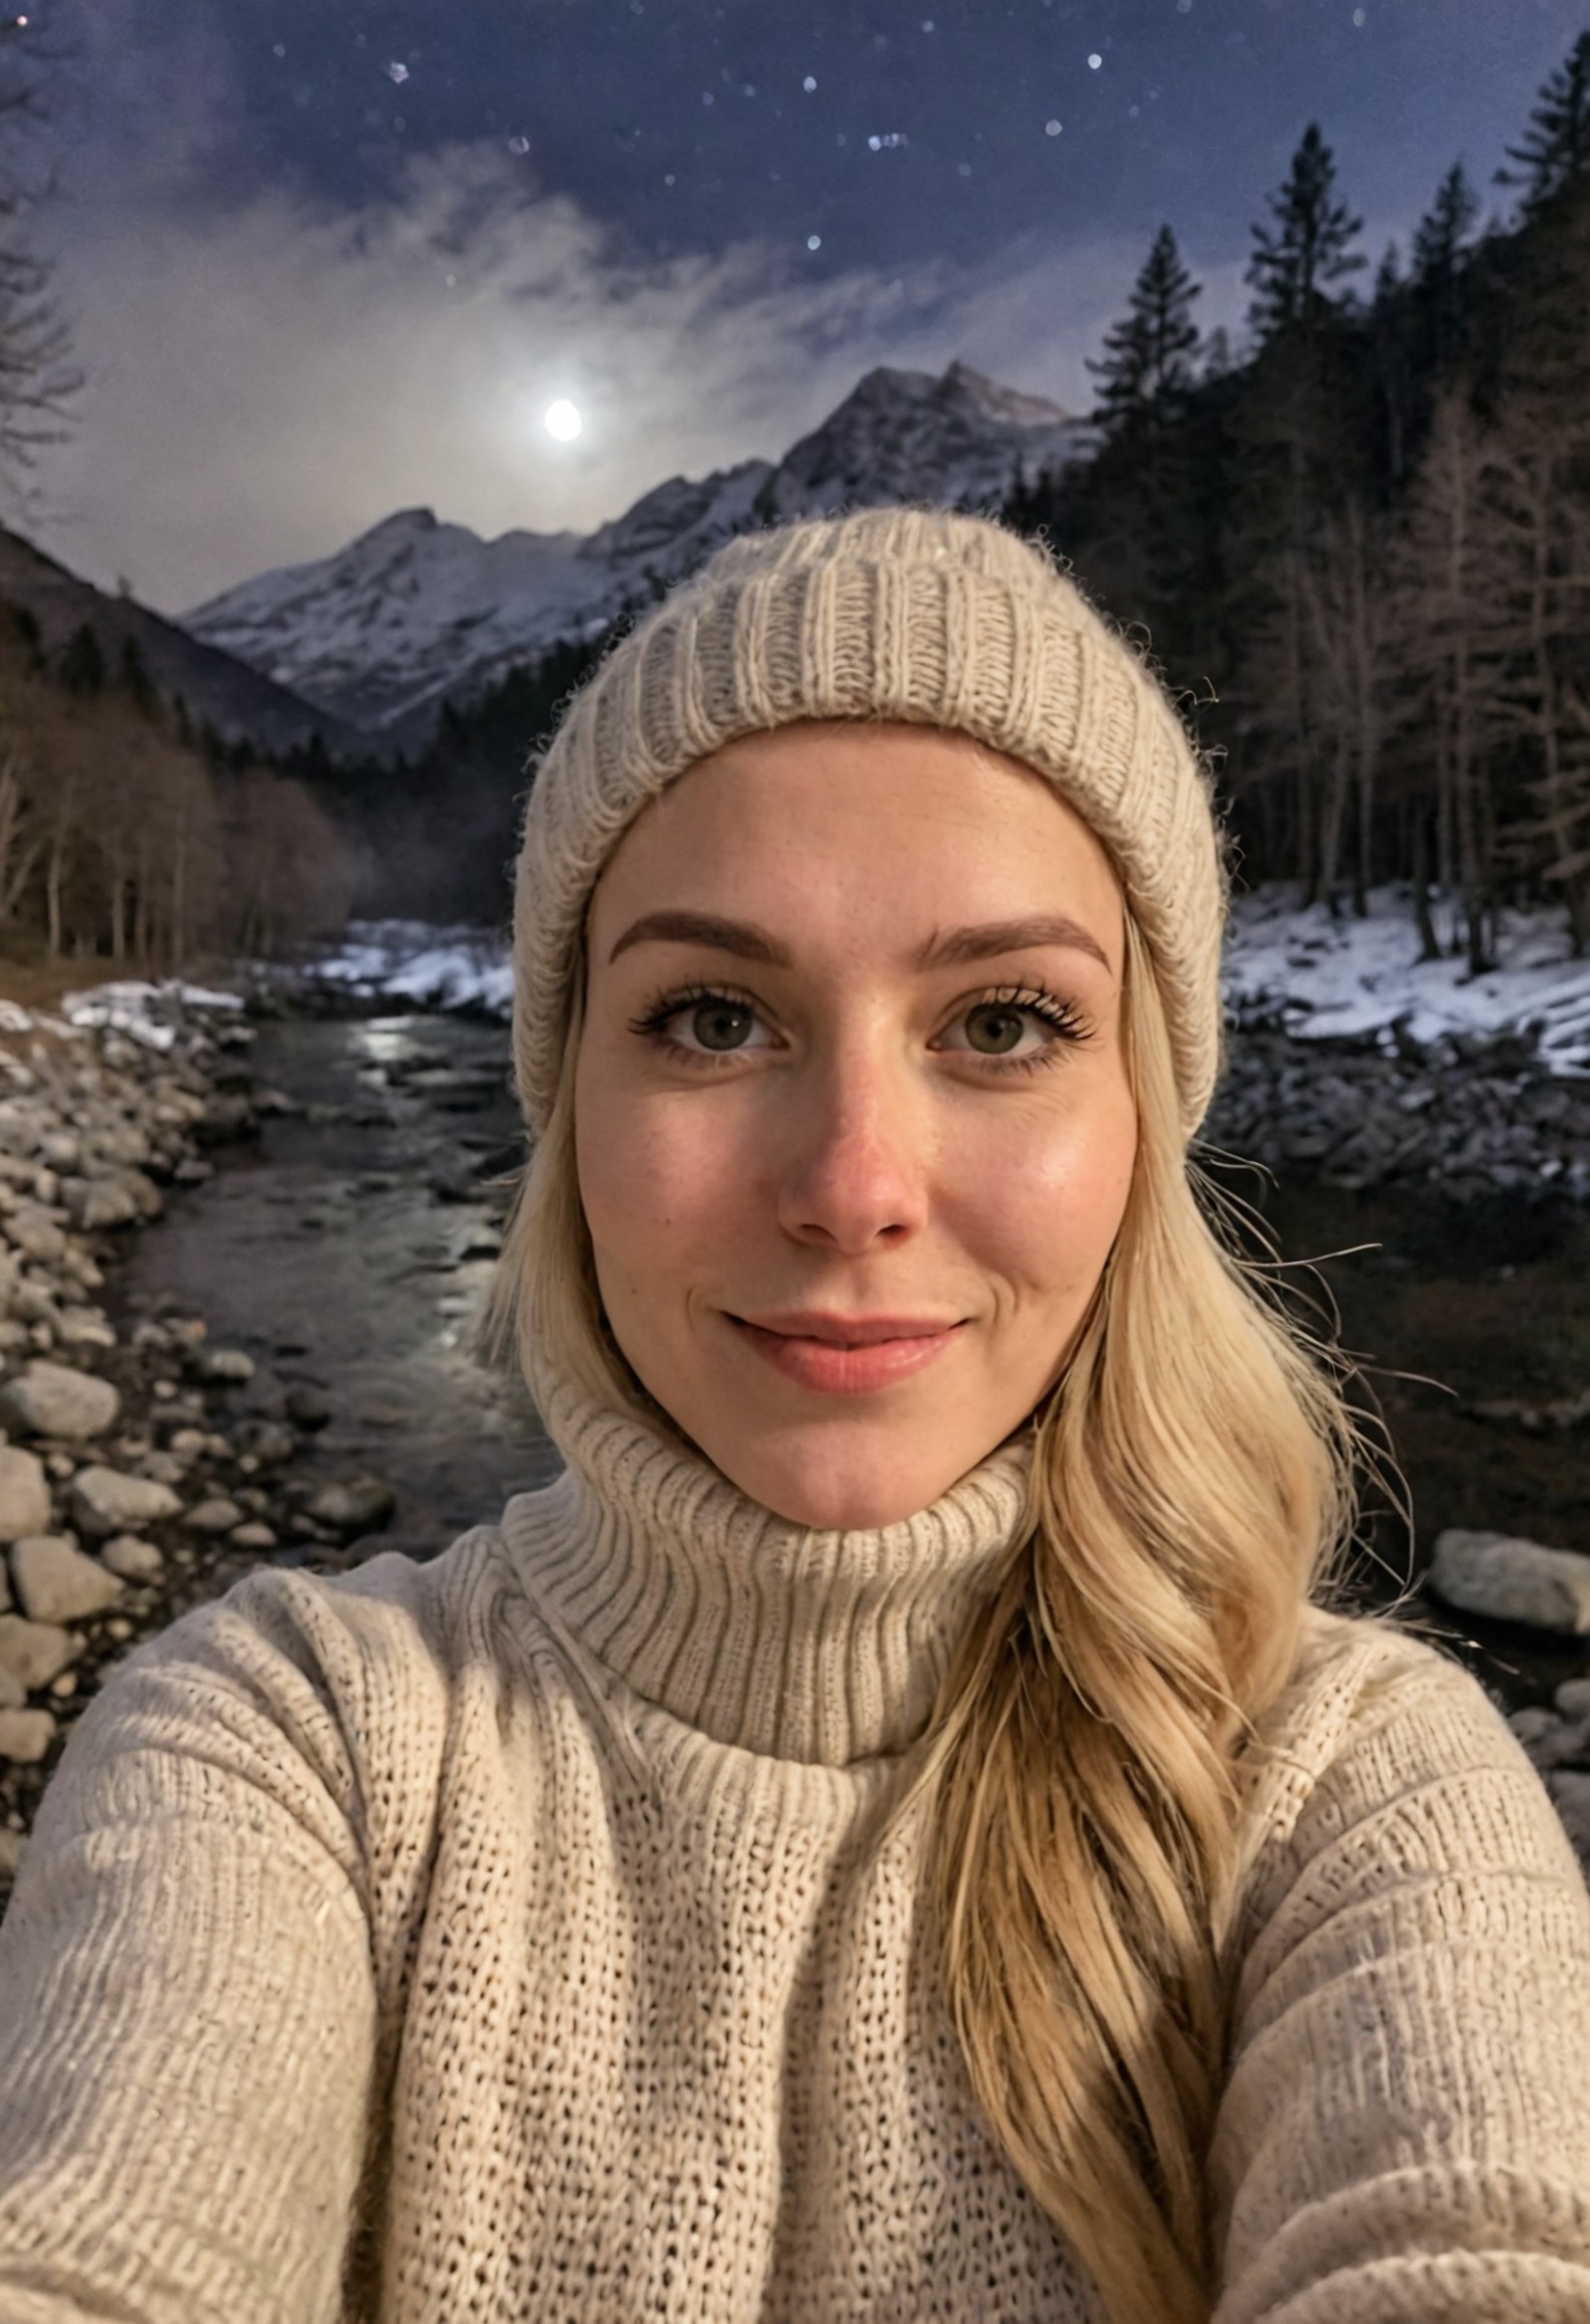 photograph, photo of woman with blonde hair, selfie, upper body, solo, wearing pullover, outdoors, (night), mountains, rea...